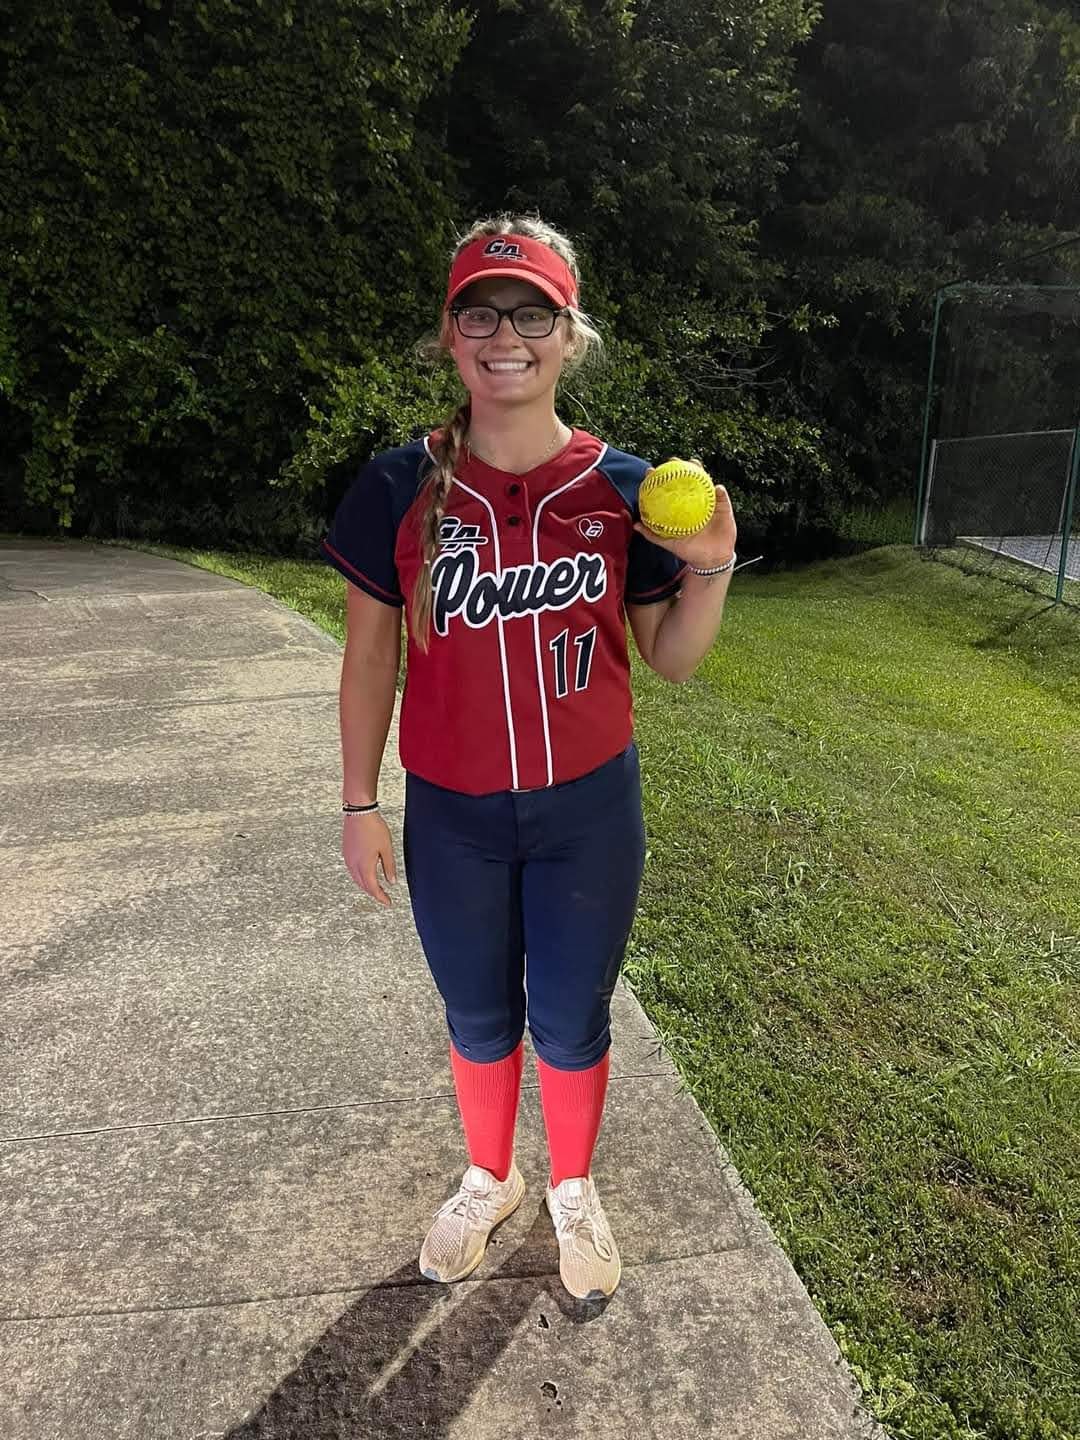 Payton is looking at a great future on the softball diamond and plans on studying physical therapy as a result of the treatment she received at Children's Healthcare of Atlanta.